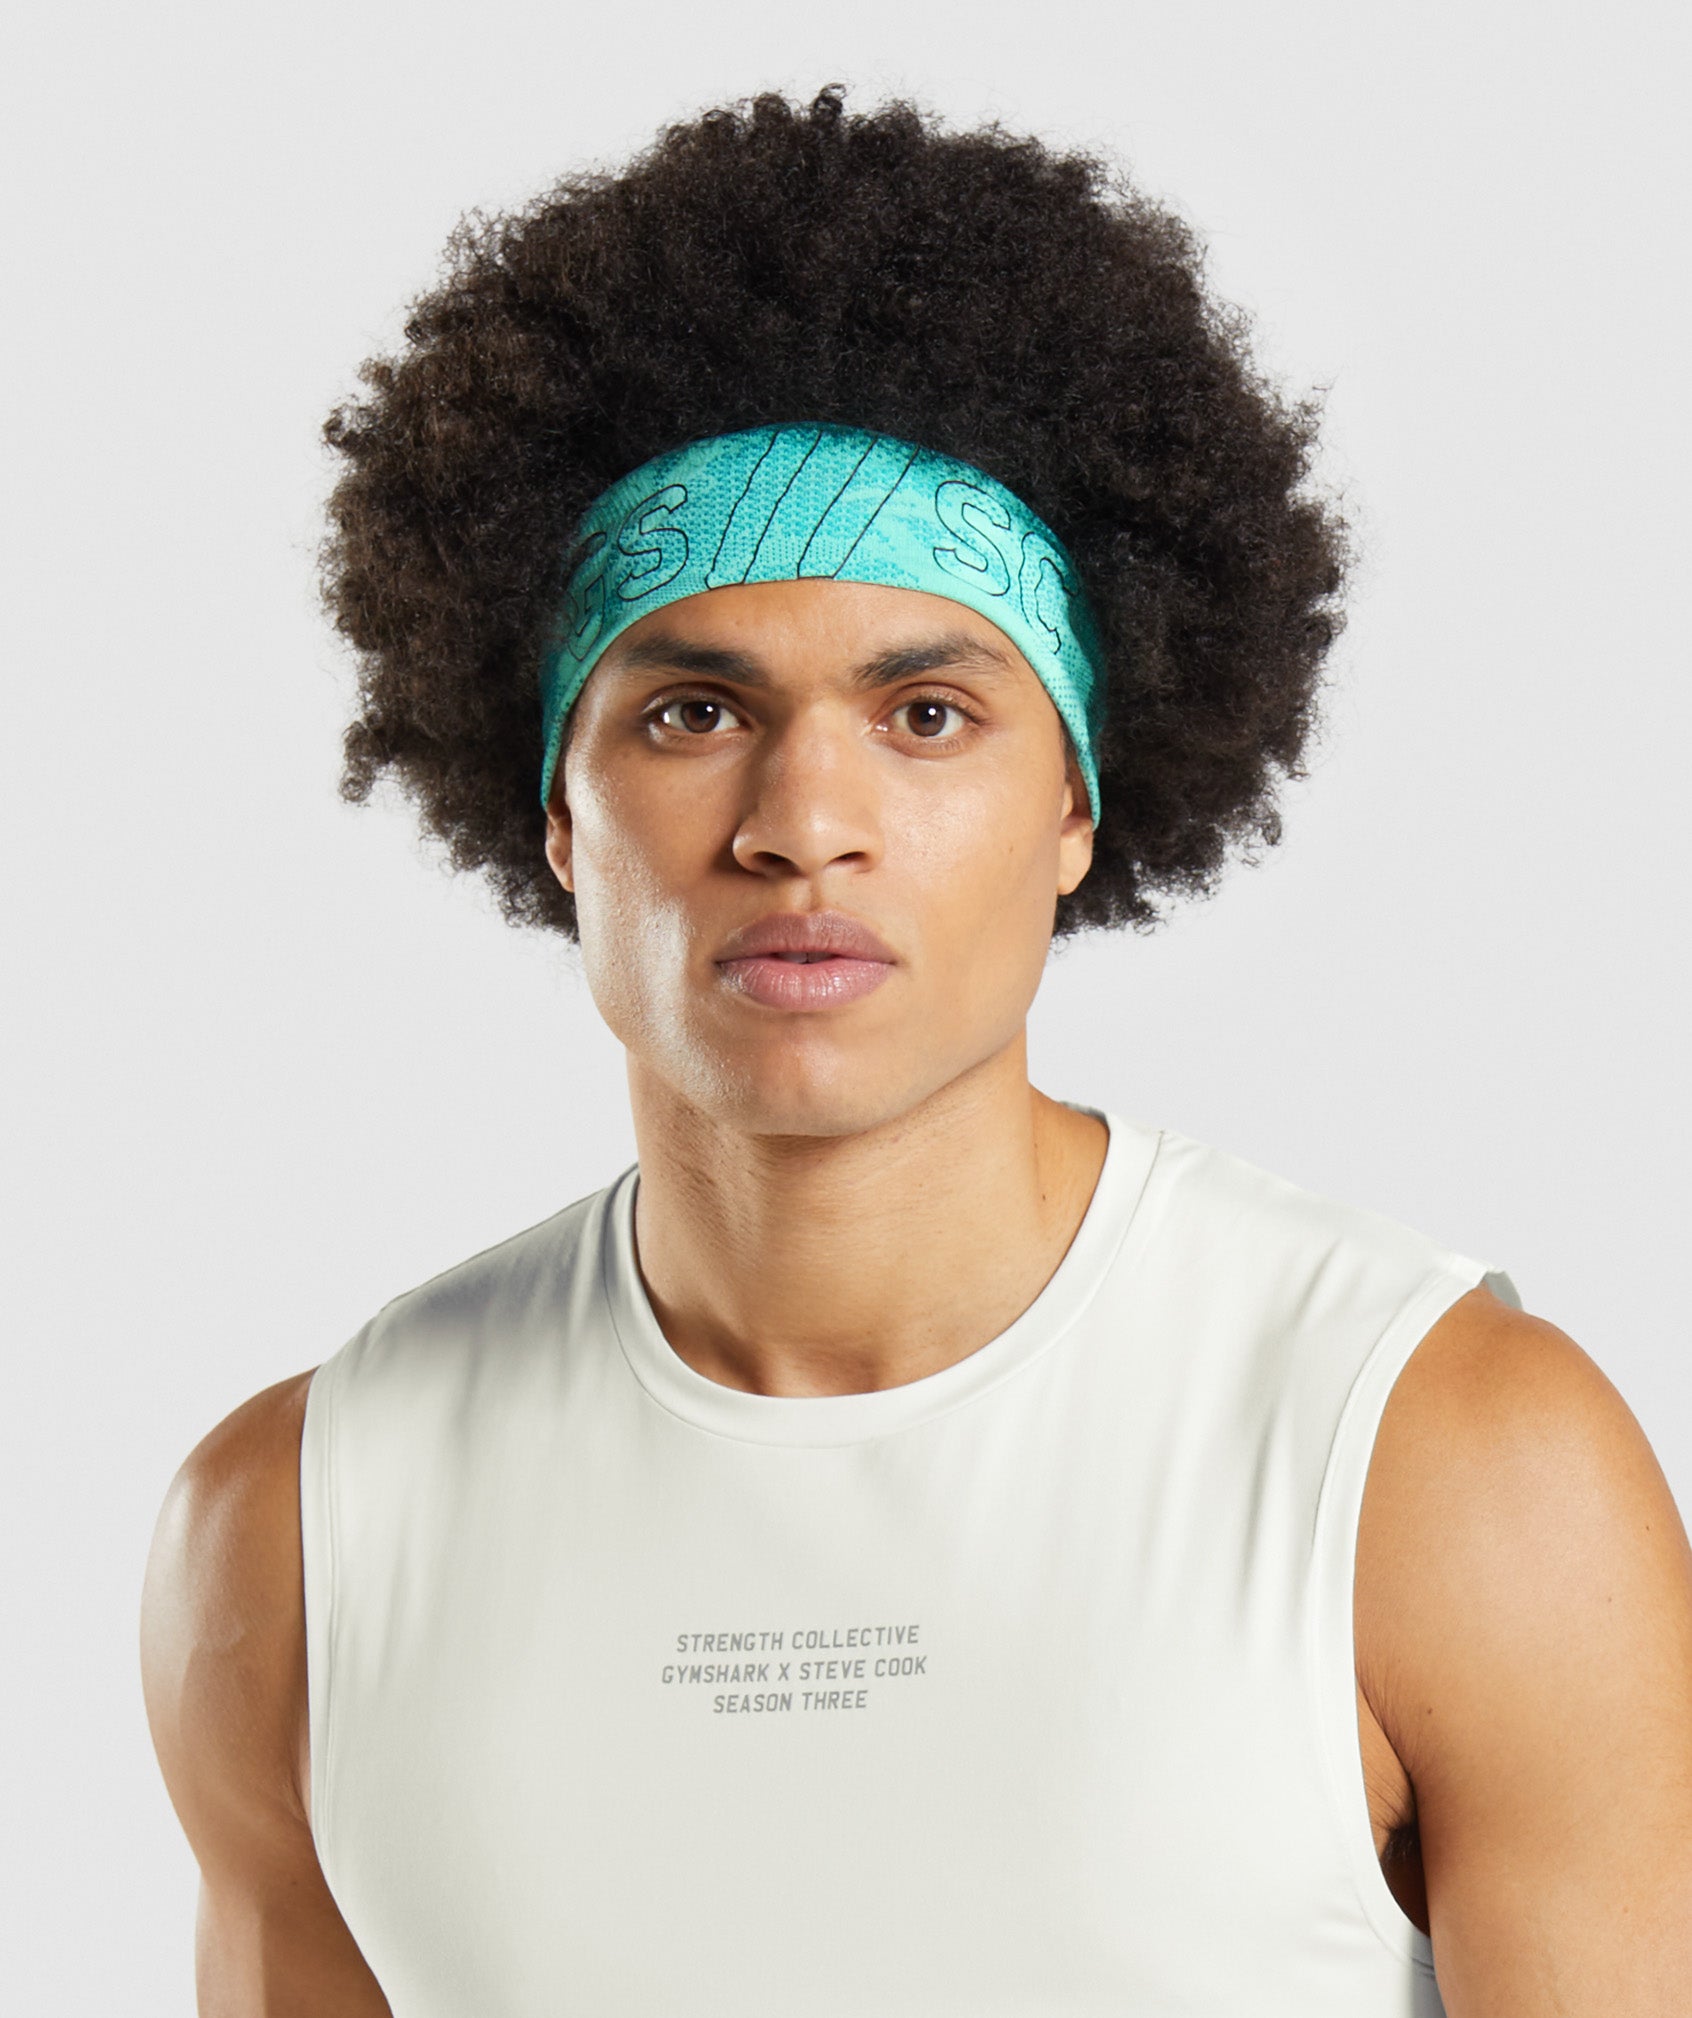 Gymshark//Steve Cook Headband in Turquoise - view 1